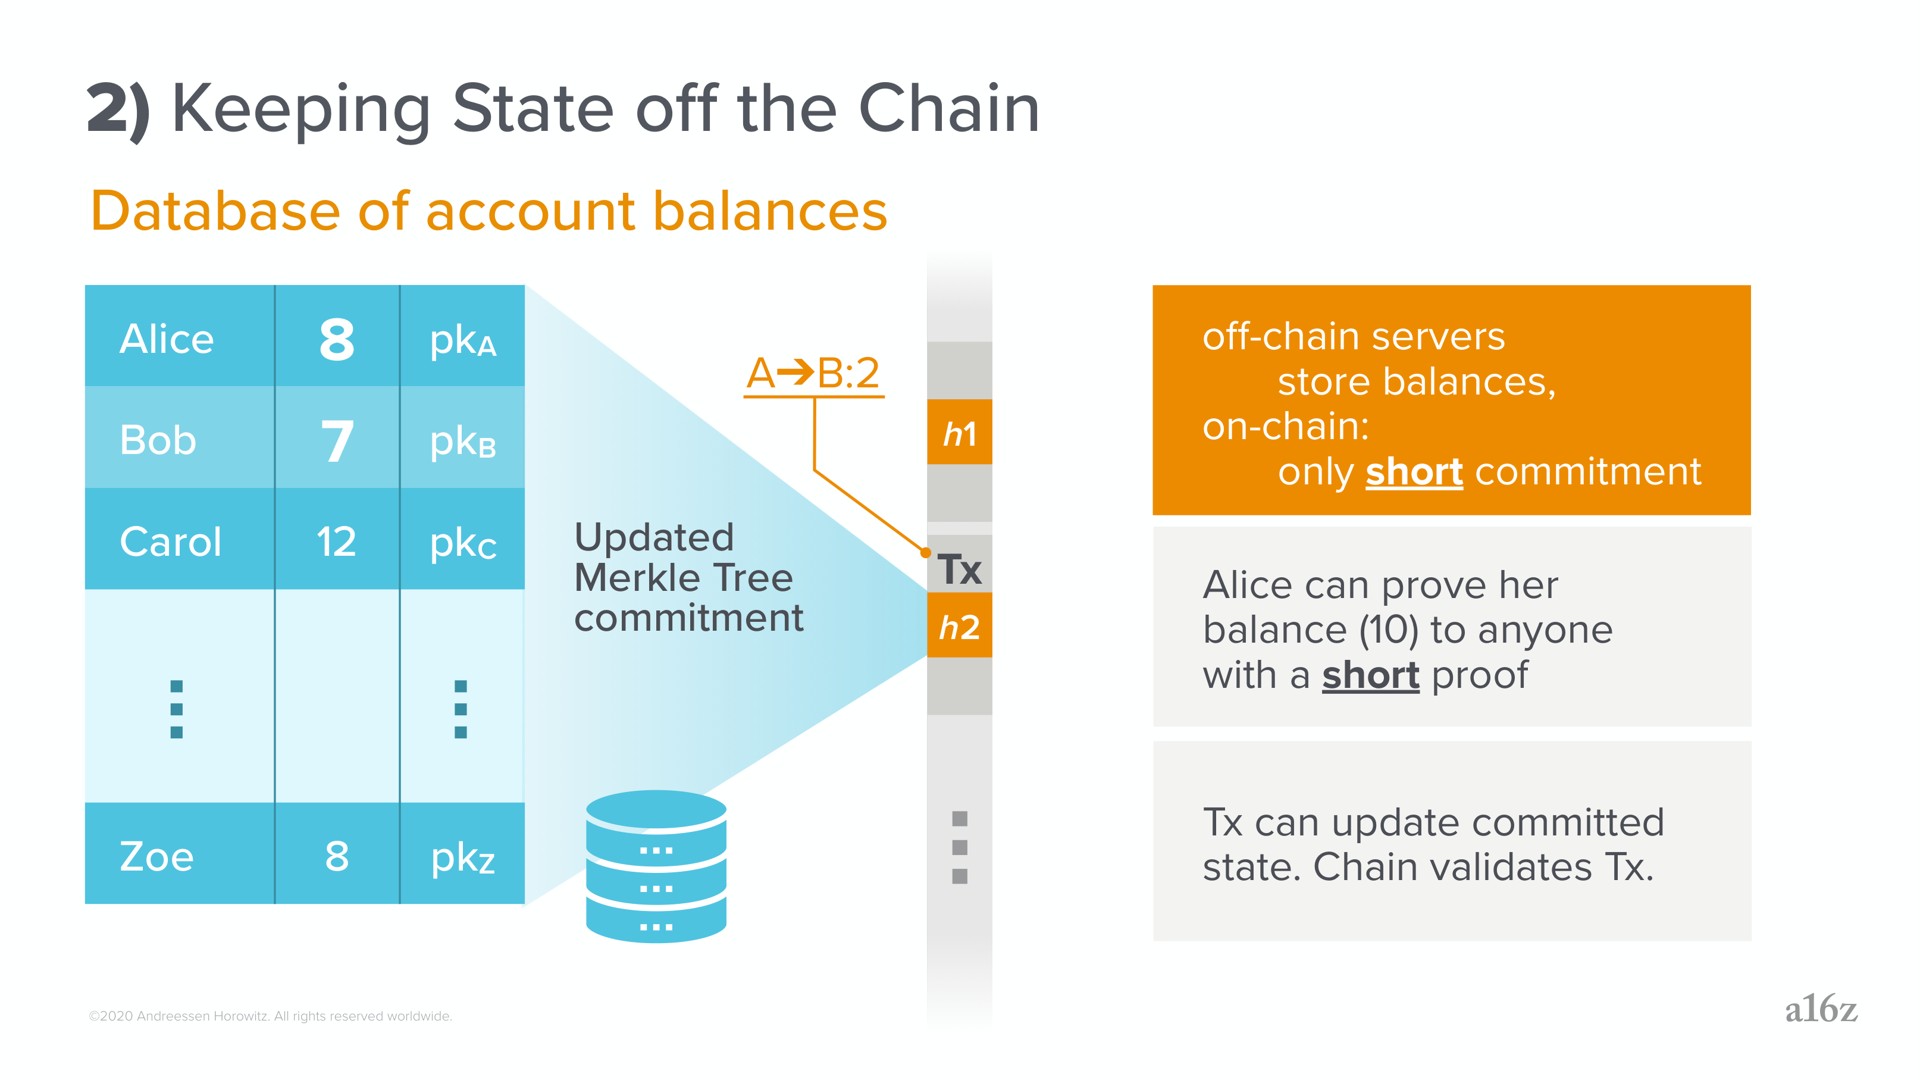 keeping state the chain off | a16z